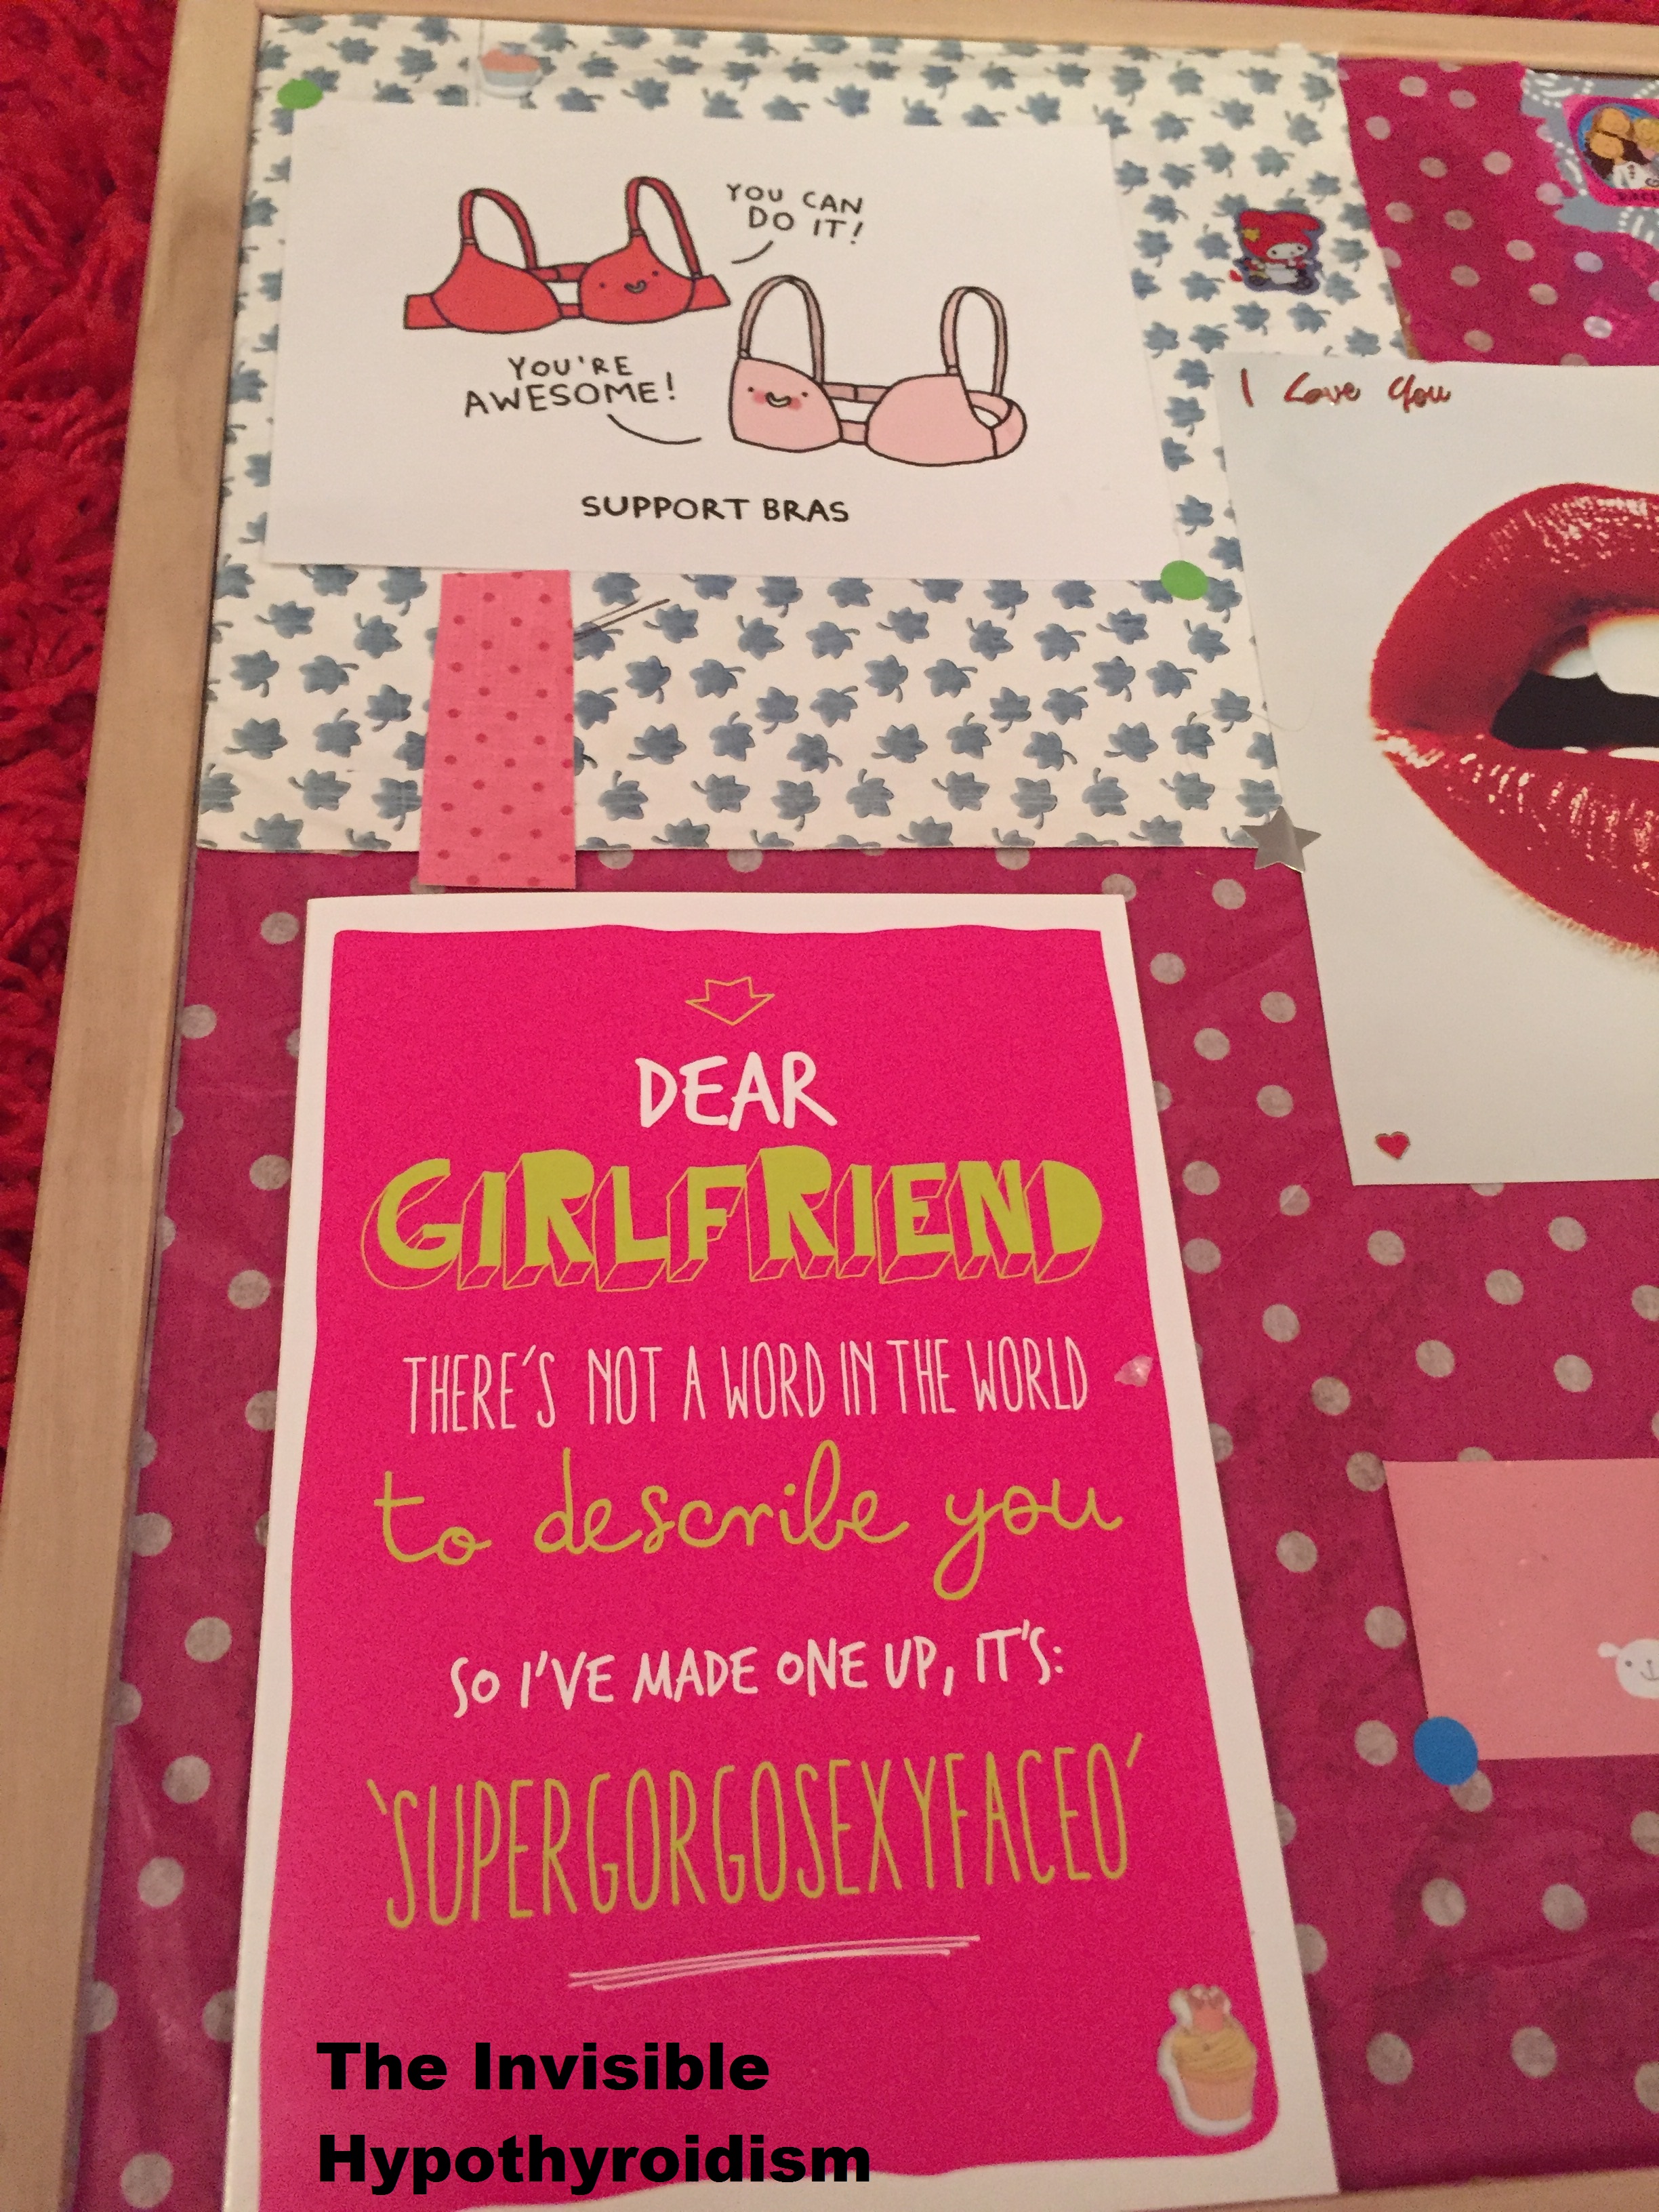 A photo of a positivity board showing a card with the caption 'Support Bras' - 'You can do it!, You're awsome'